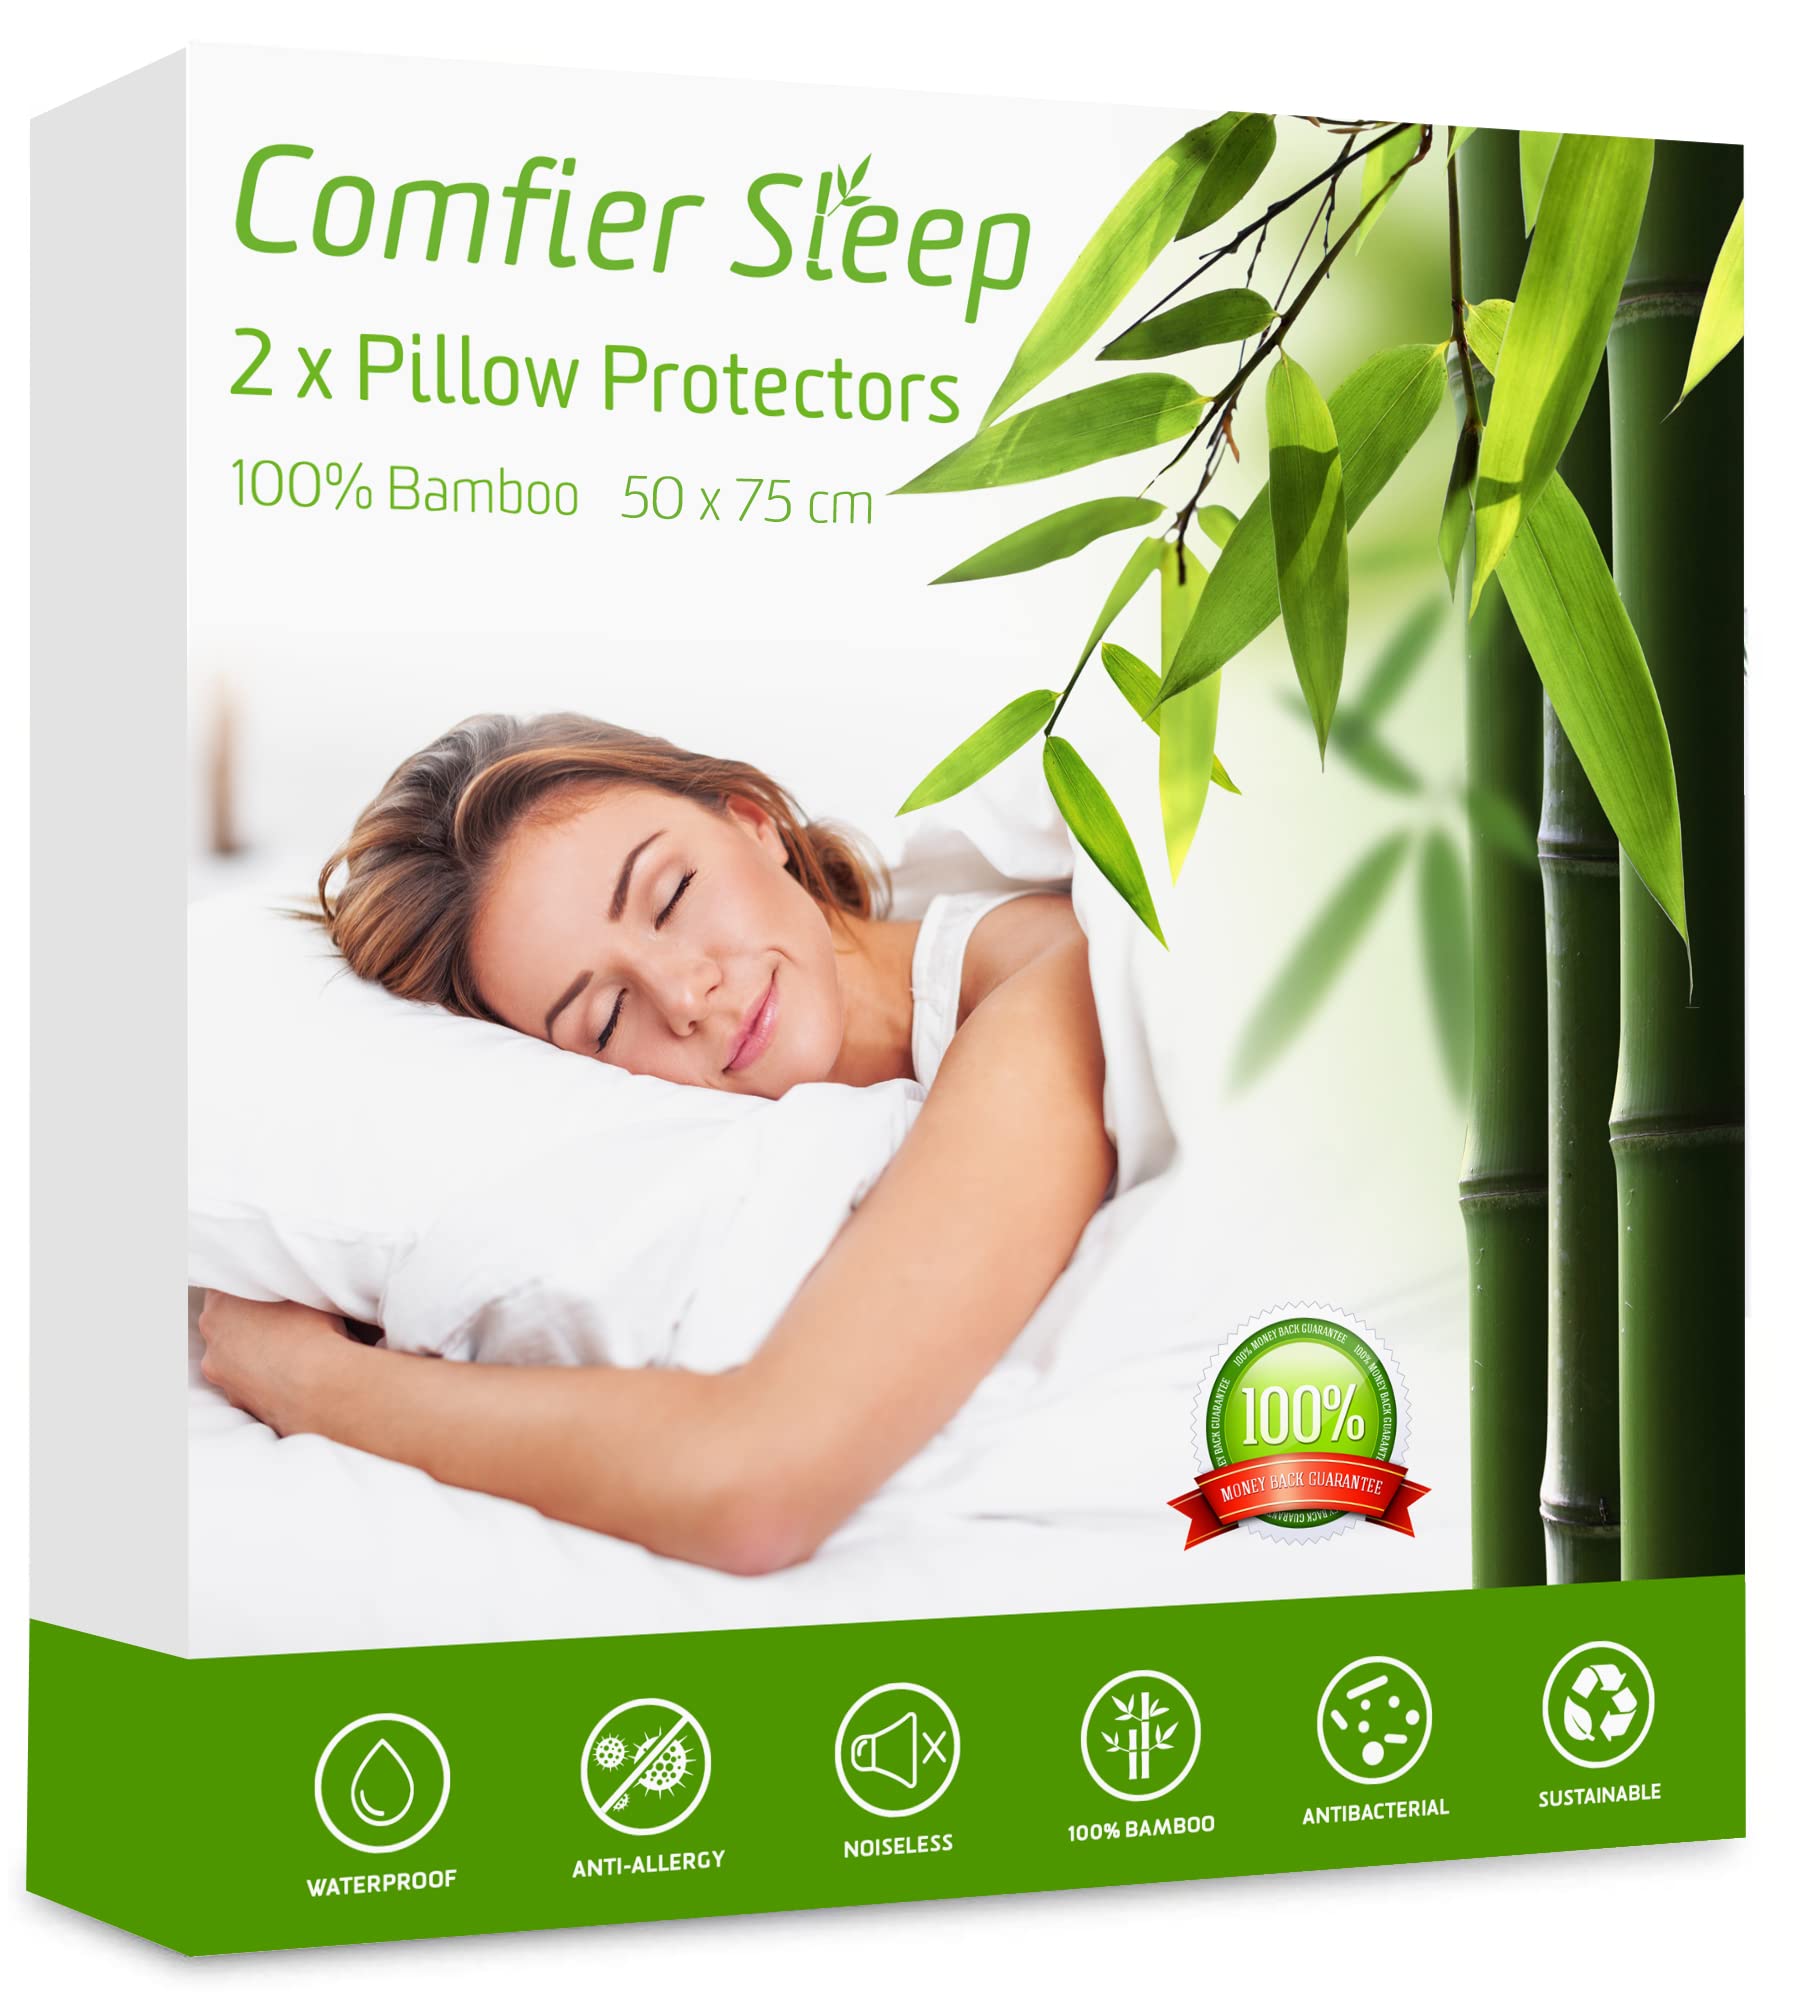 Comfier Sleep Waterproof Pillow Protectors 50x75cm Anti Allergy Super Soft Pillow Protectors 2 pack, 100% bamboo Pillow Cases 2 Pack Zipped suitable for Standard Pillows